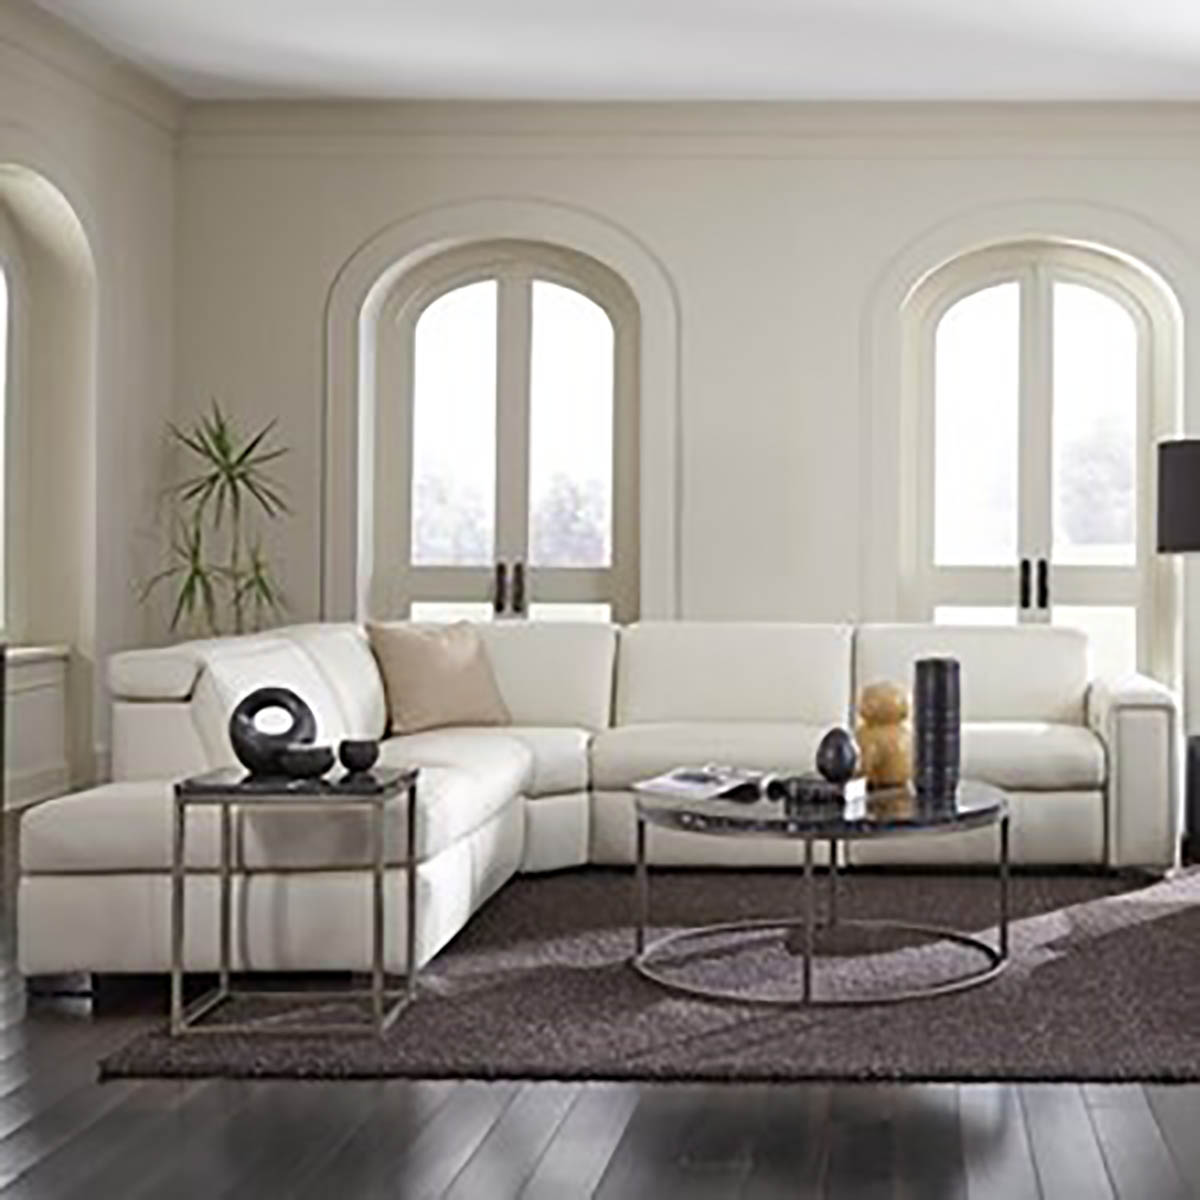 Palliser Titan 4pc Reclining Sectional with Left Hand Facing Stationary Nest image